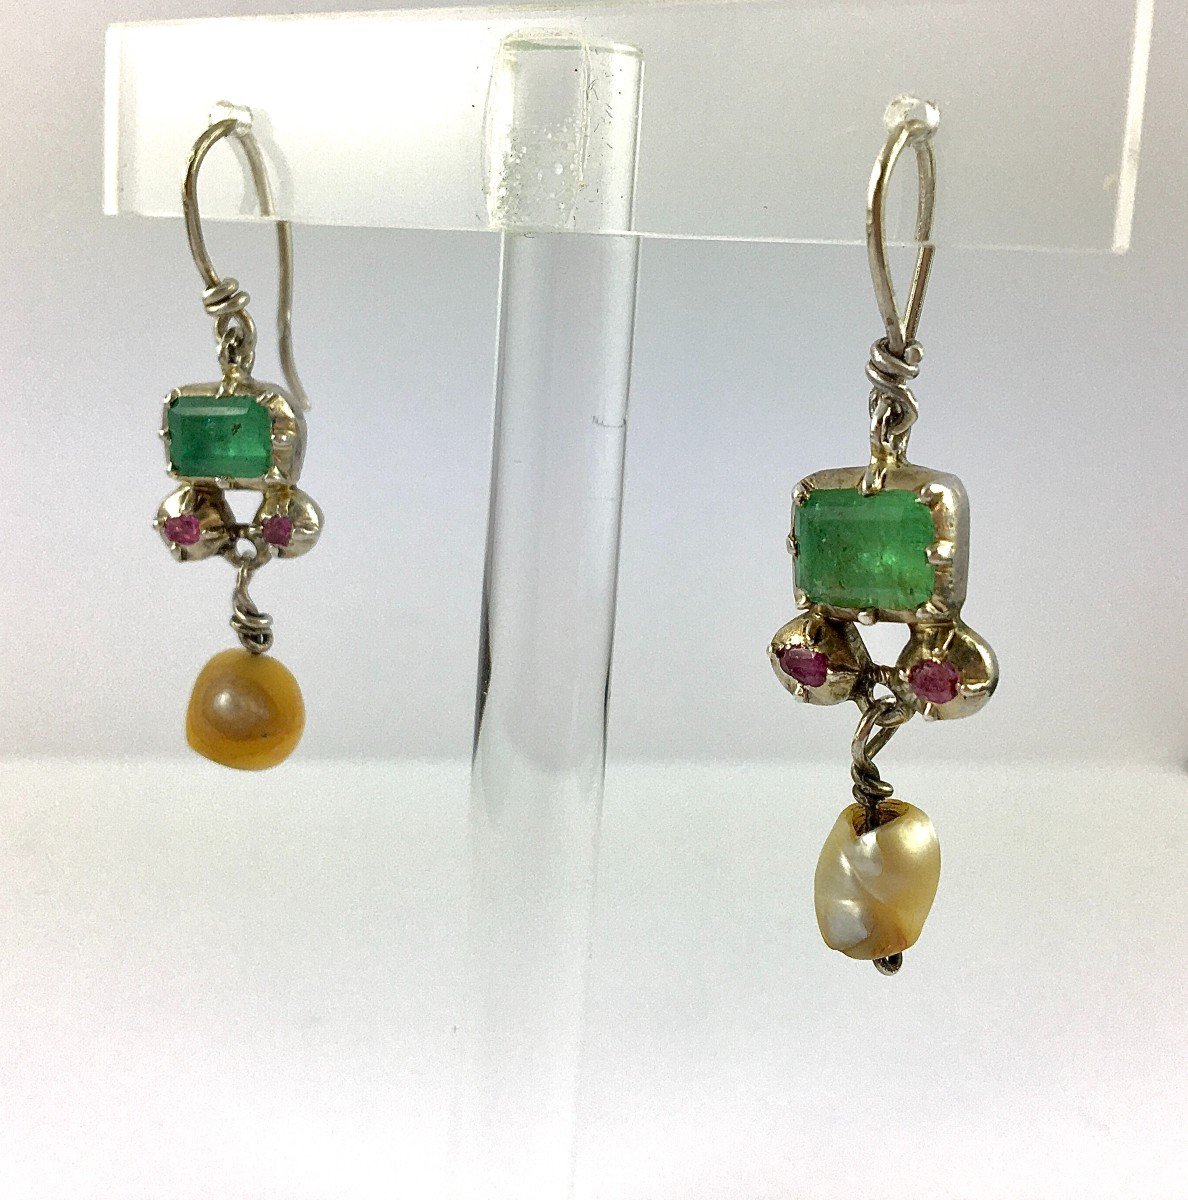 Berber Ethnic Earrings Dangling Emeralds, Rubies And Baroque Pearls On Silver-photo-3